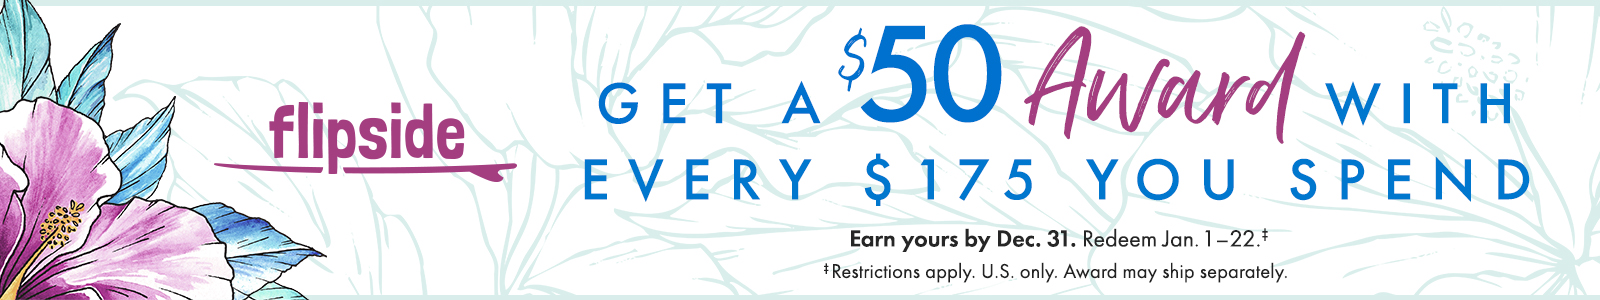 Flipside - Get a $50 Award with every $175 you spend